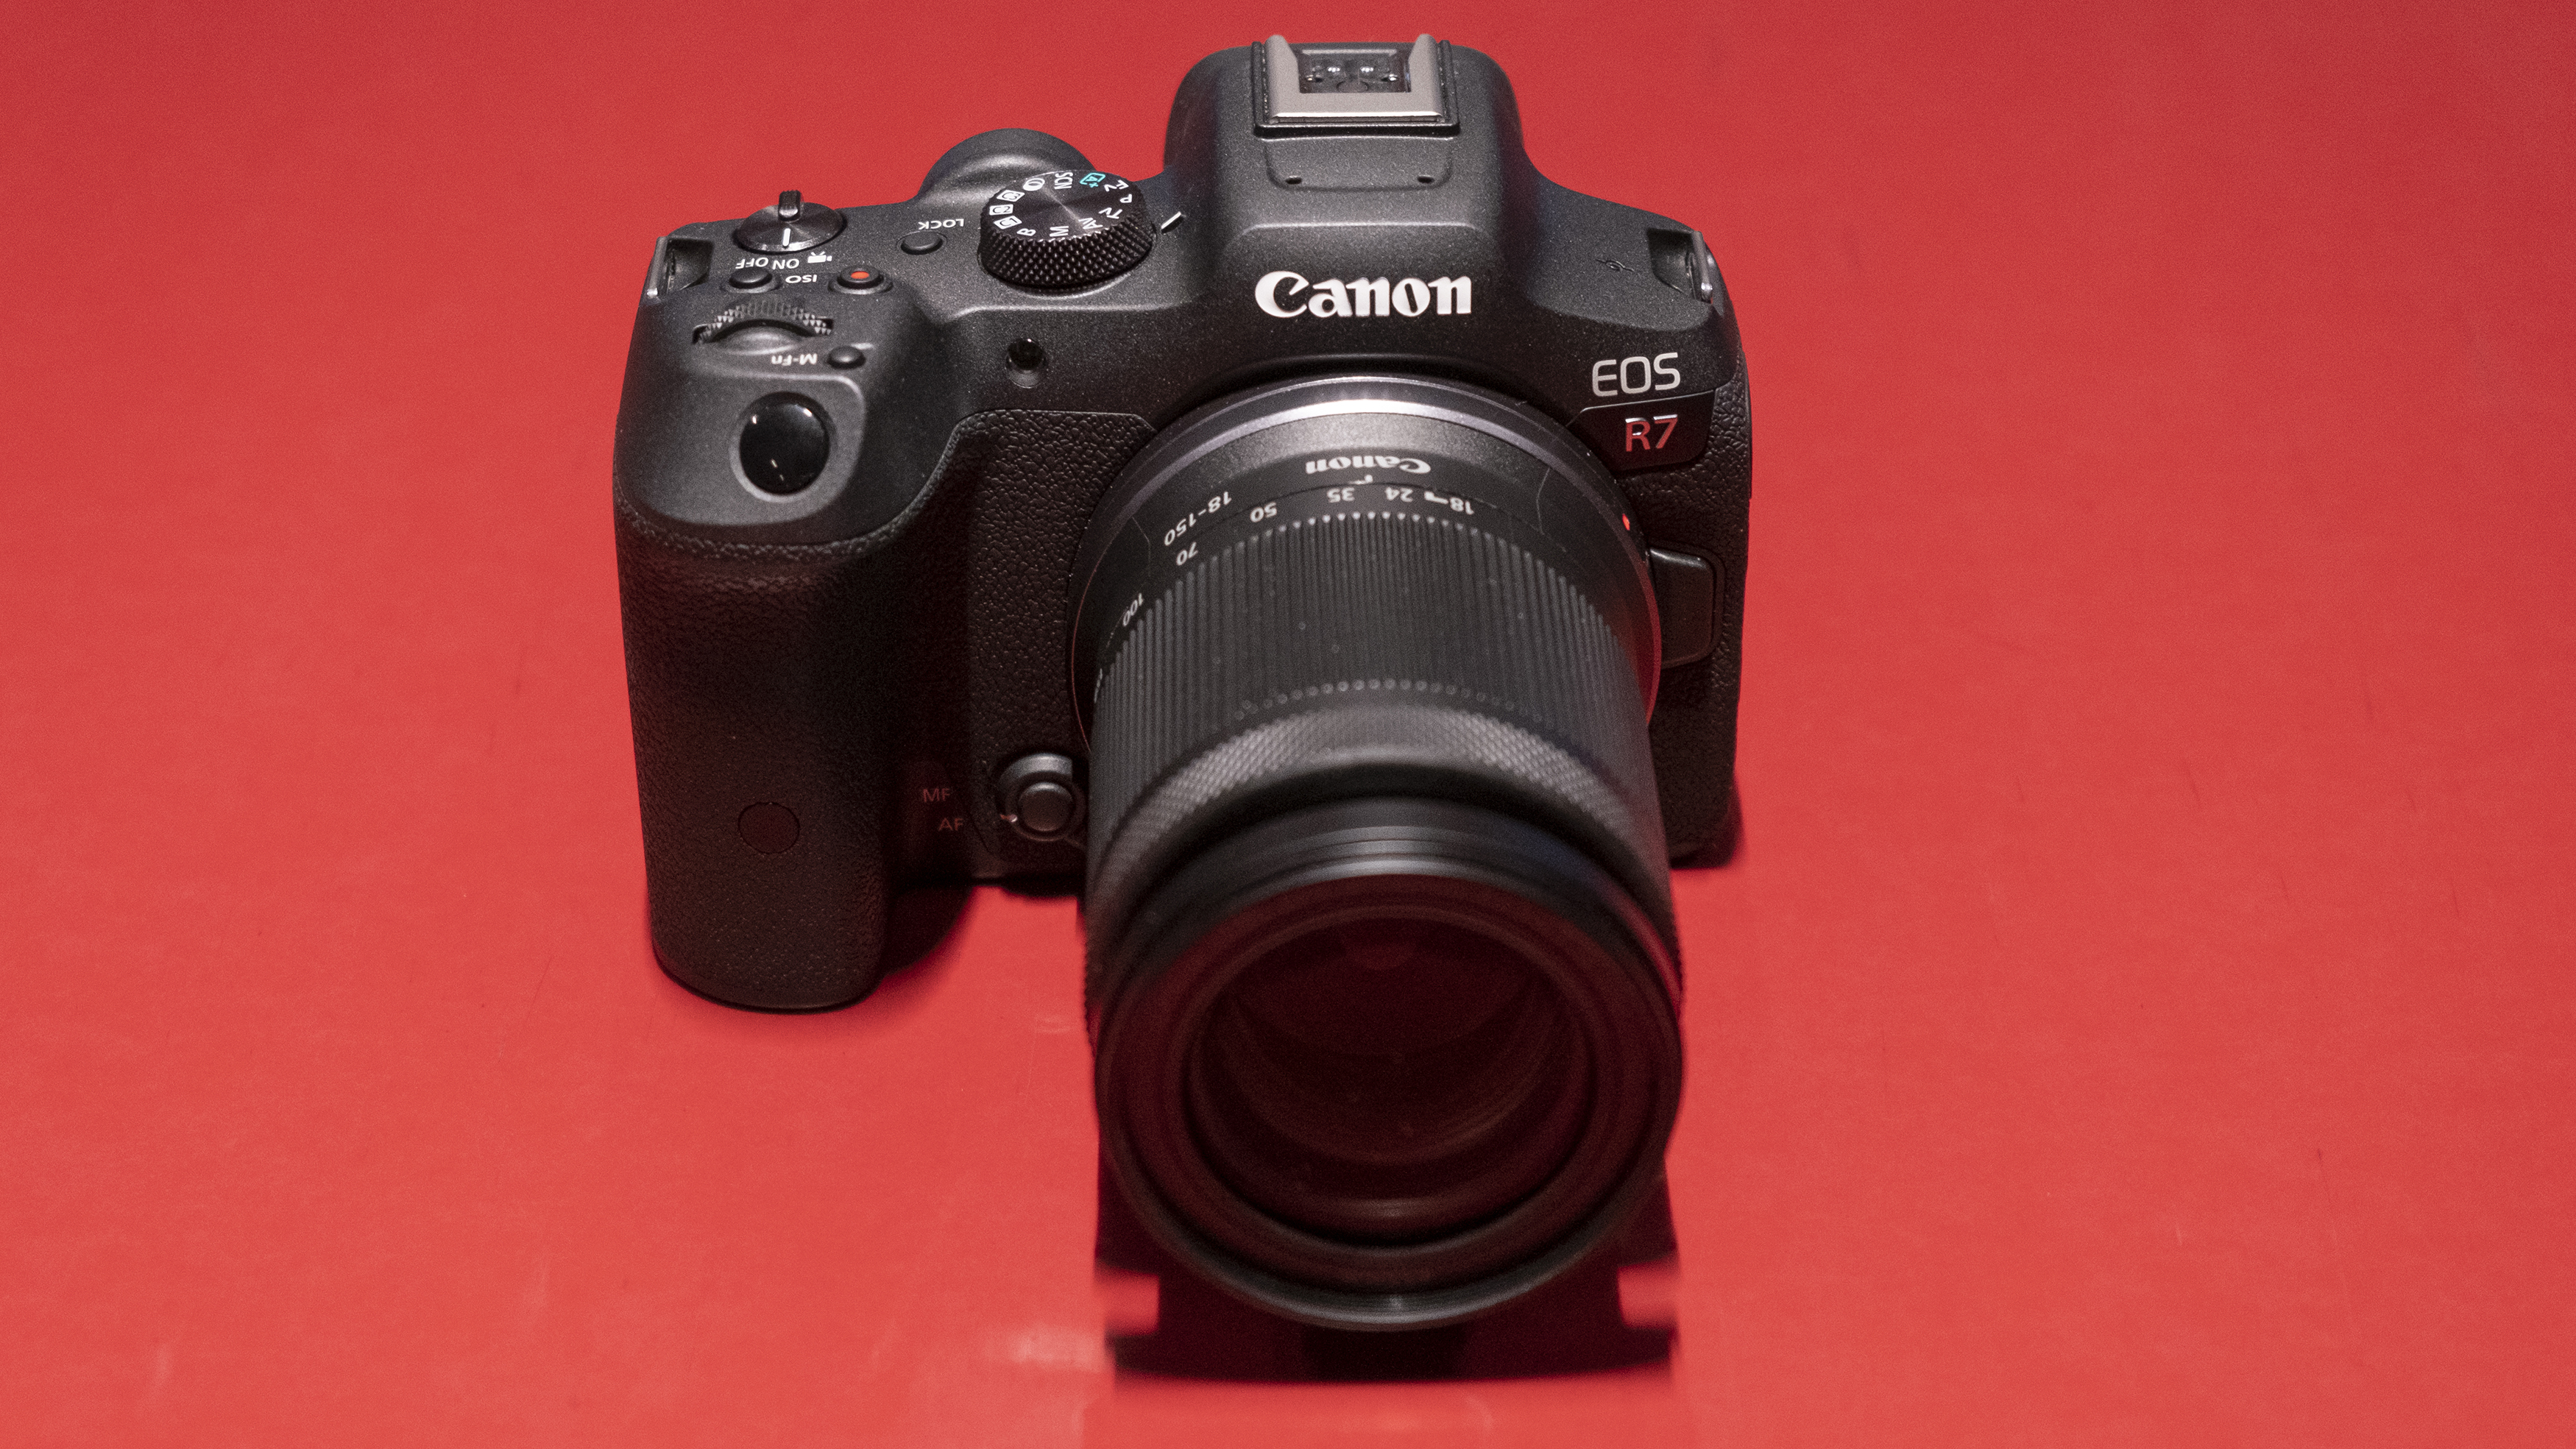 The Canon EOS R7 camera on a red background